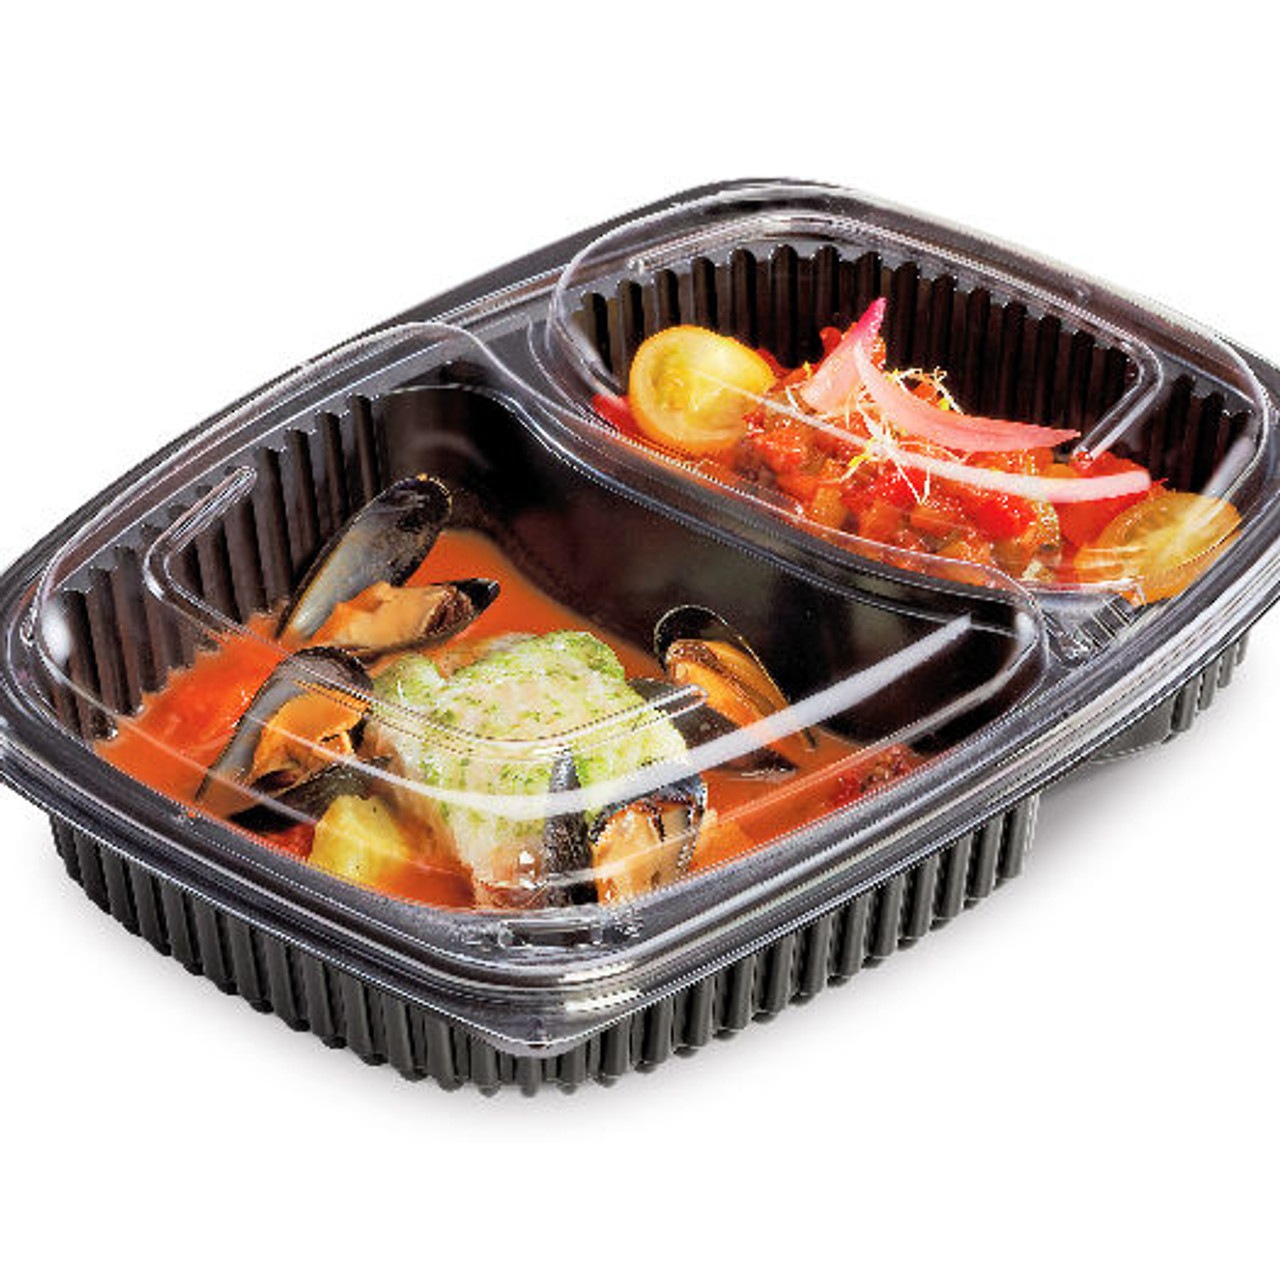 Cookipack LARGE 1,250ml  2 COMPARTMENT Black microwavable container and lids offer